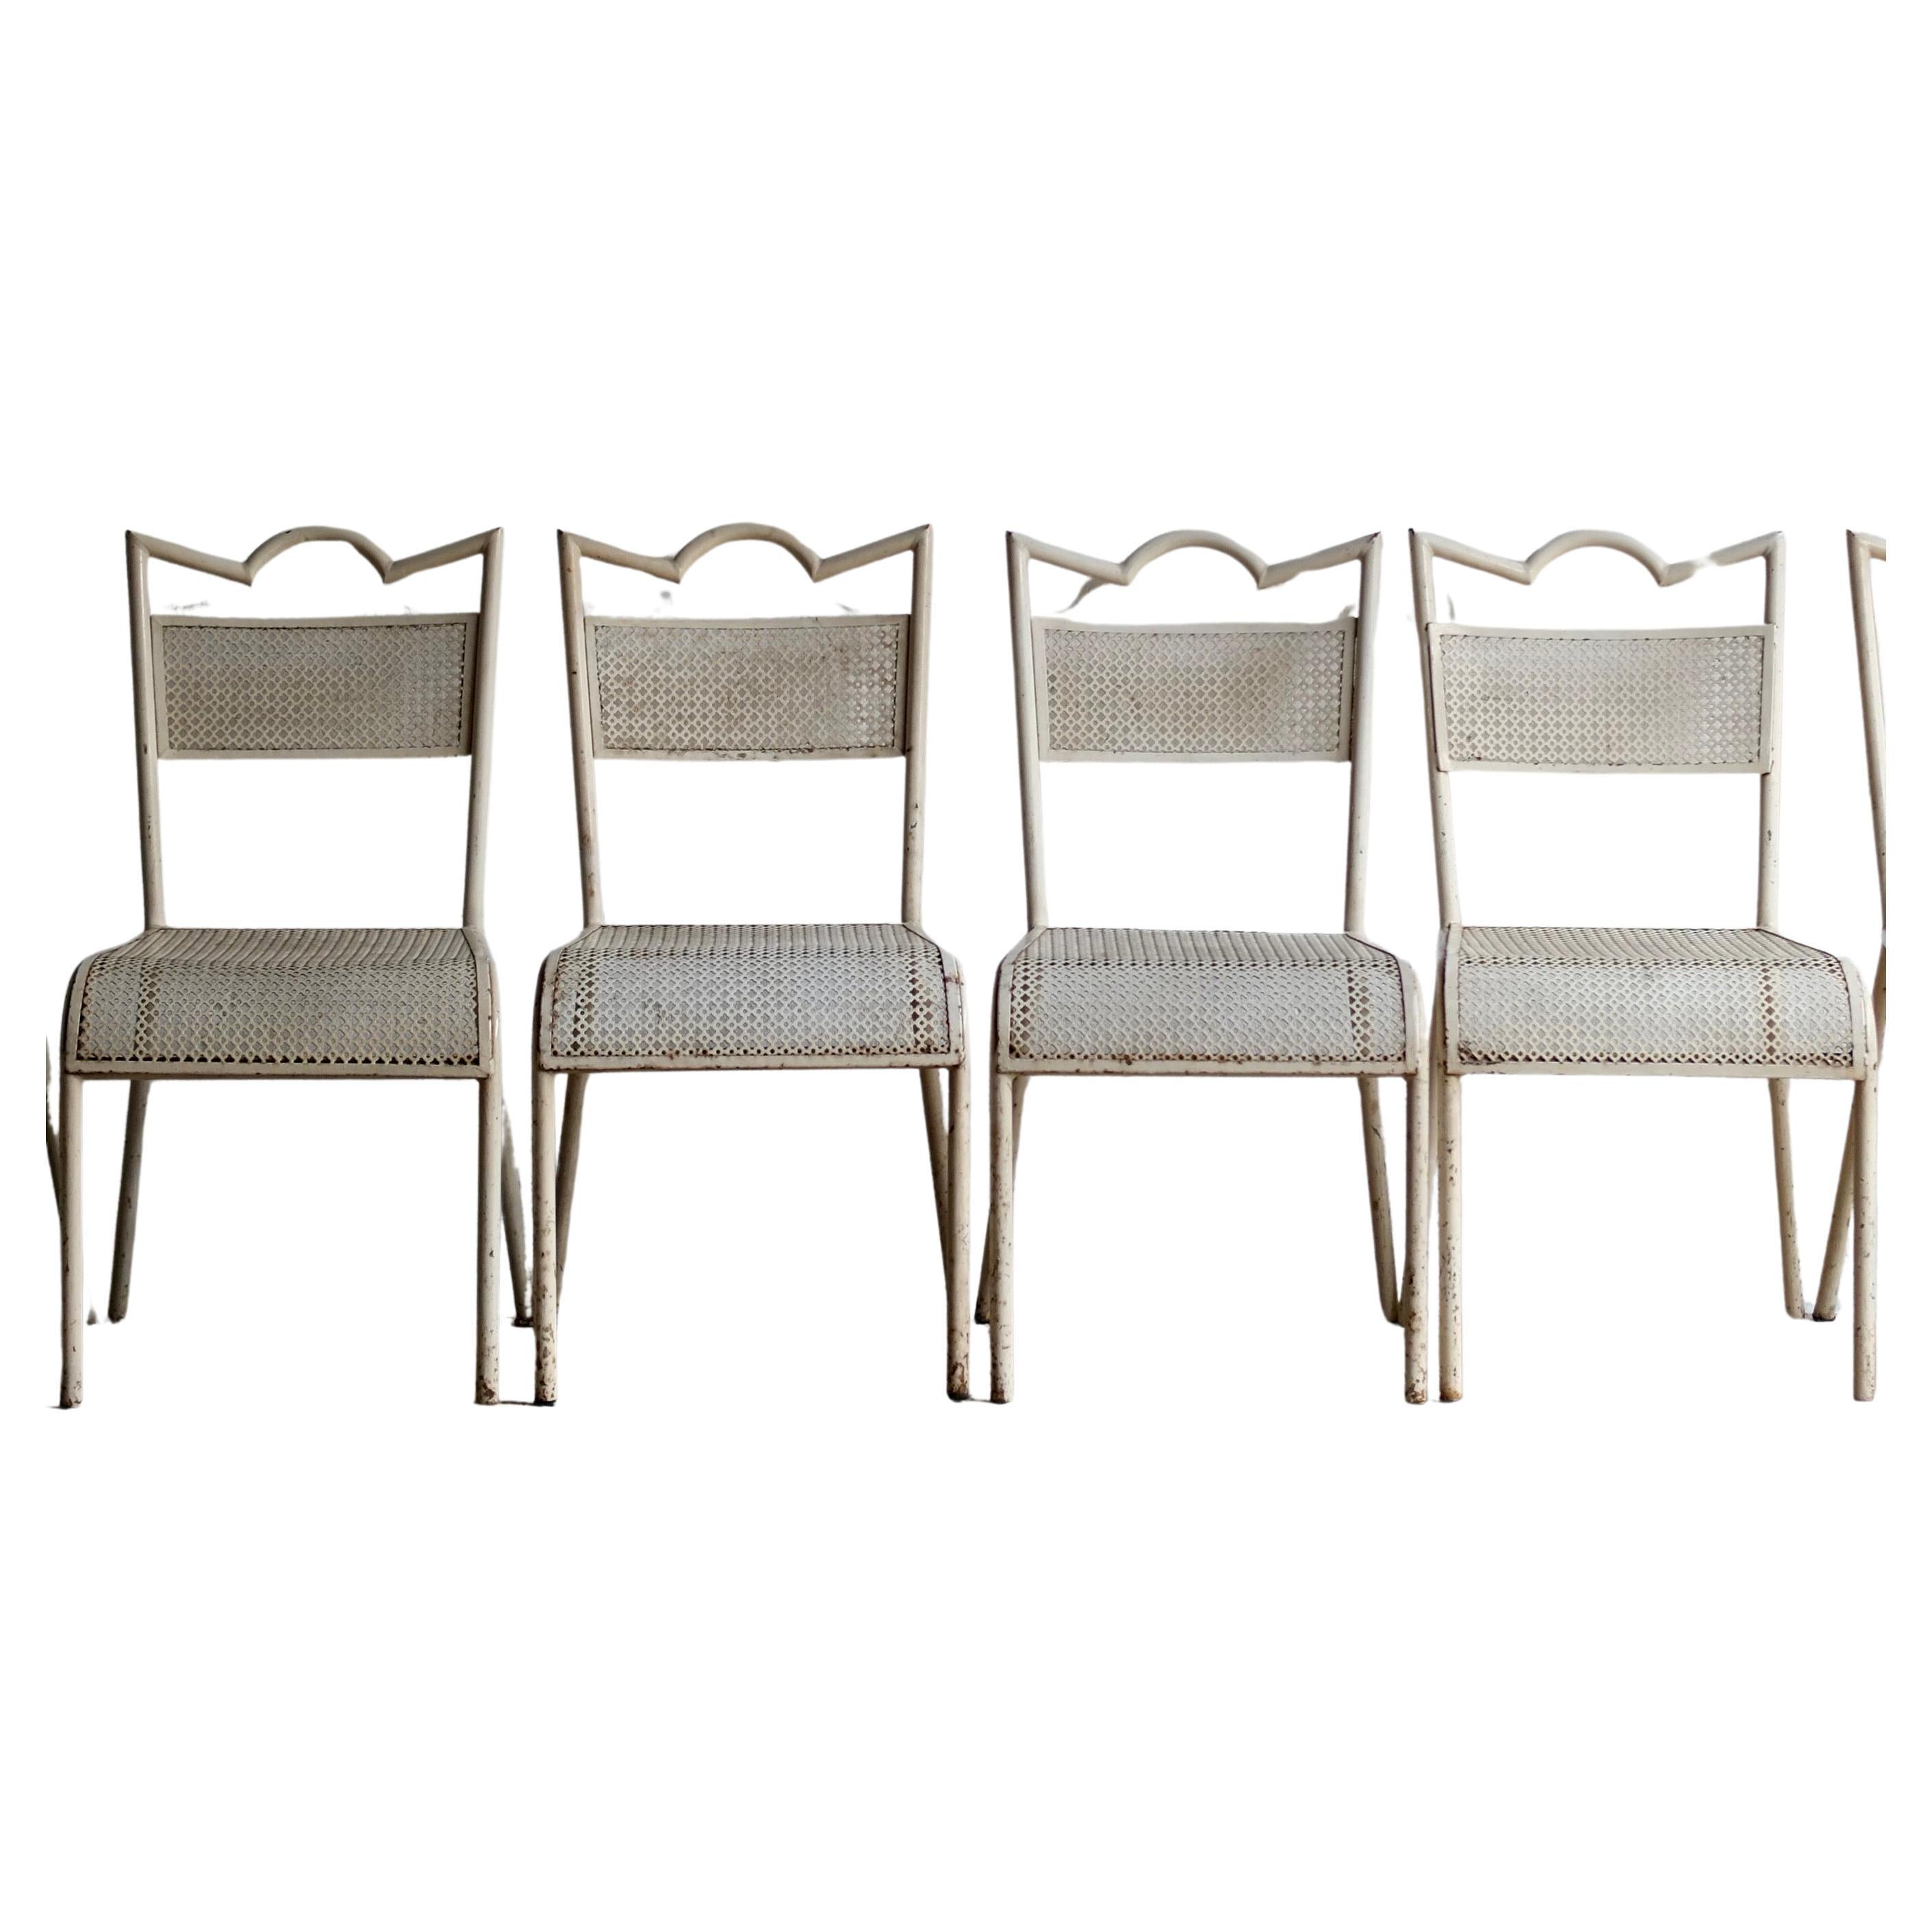 Set of Four Mathieu Mategot "Tube" Chairs, 1951 For Sale